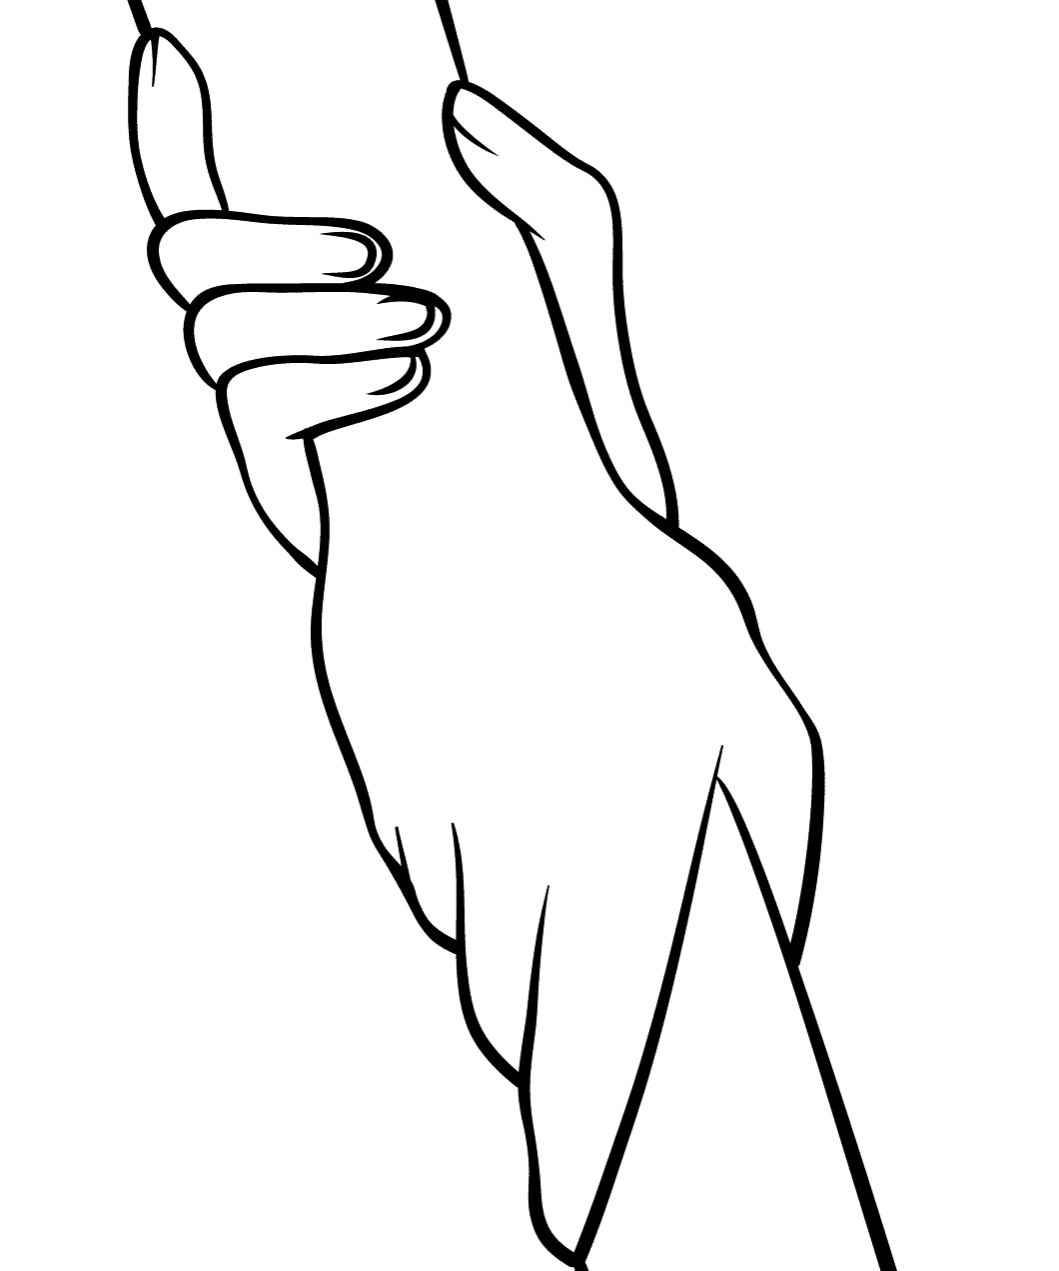 helping-hands-coloring-page